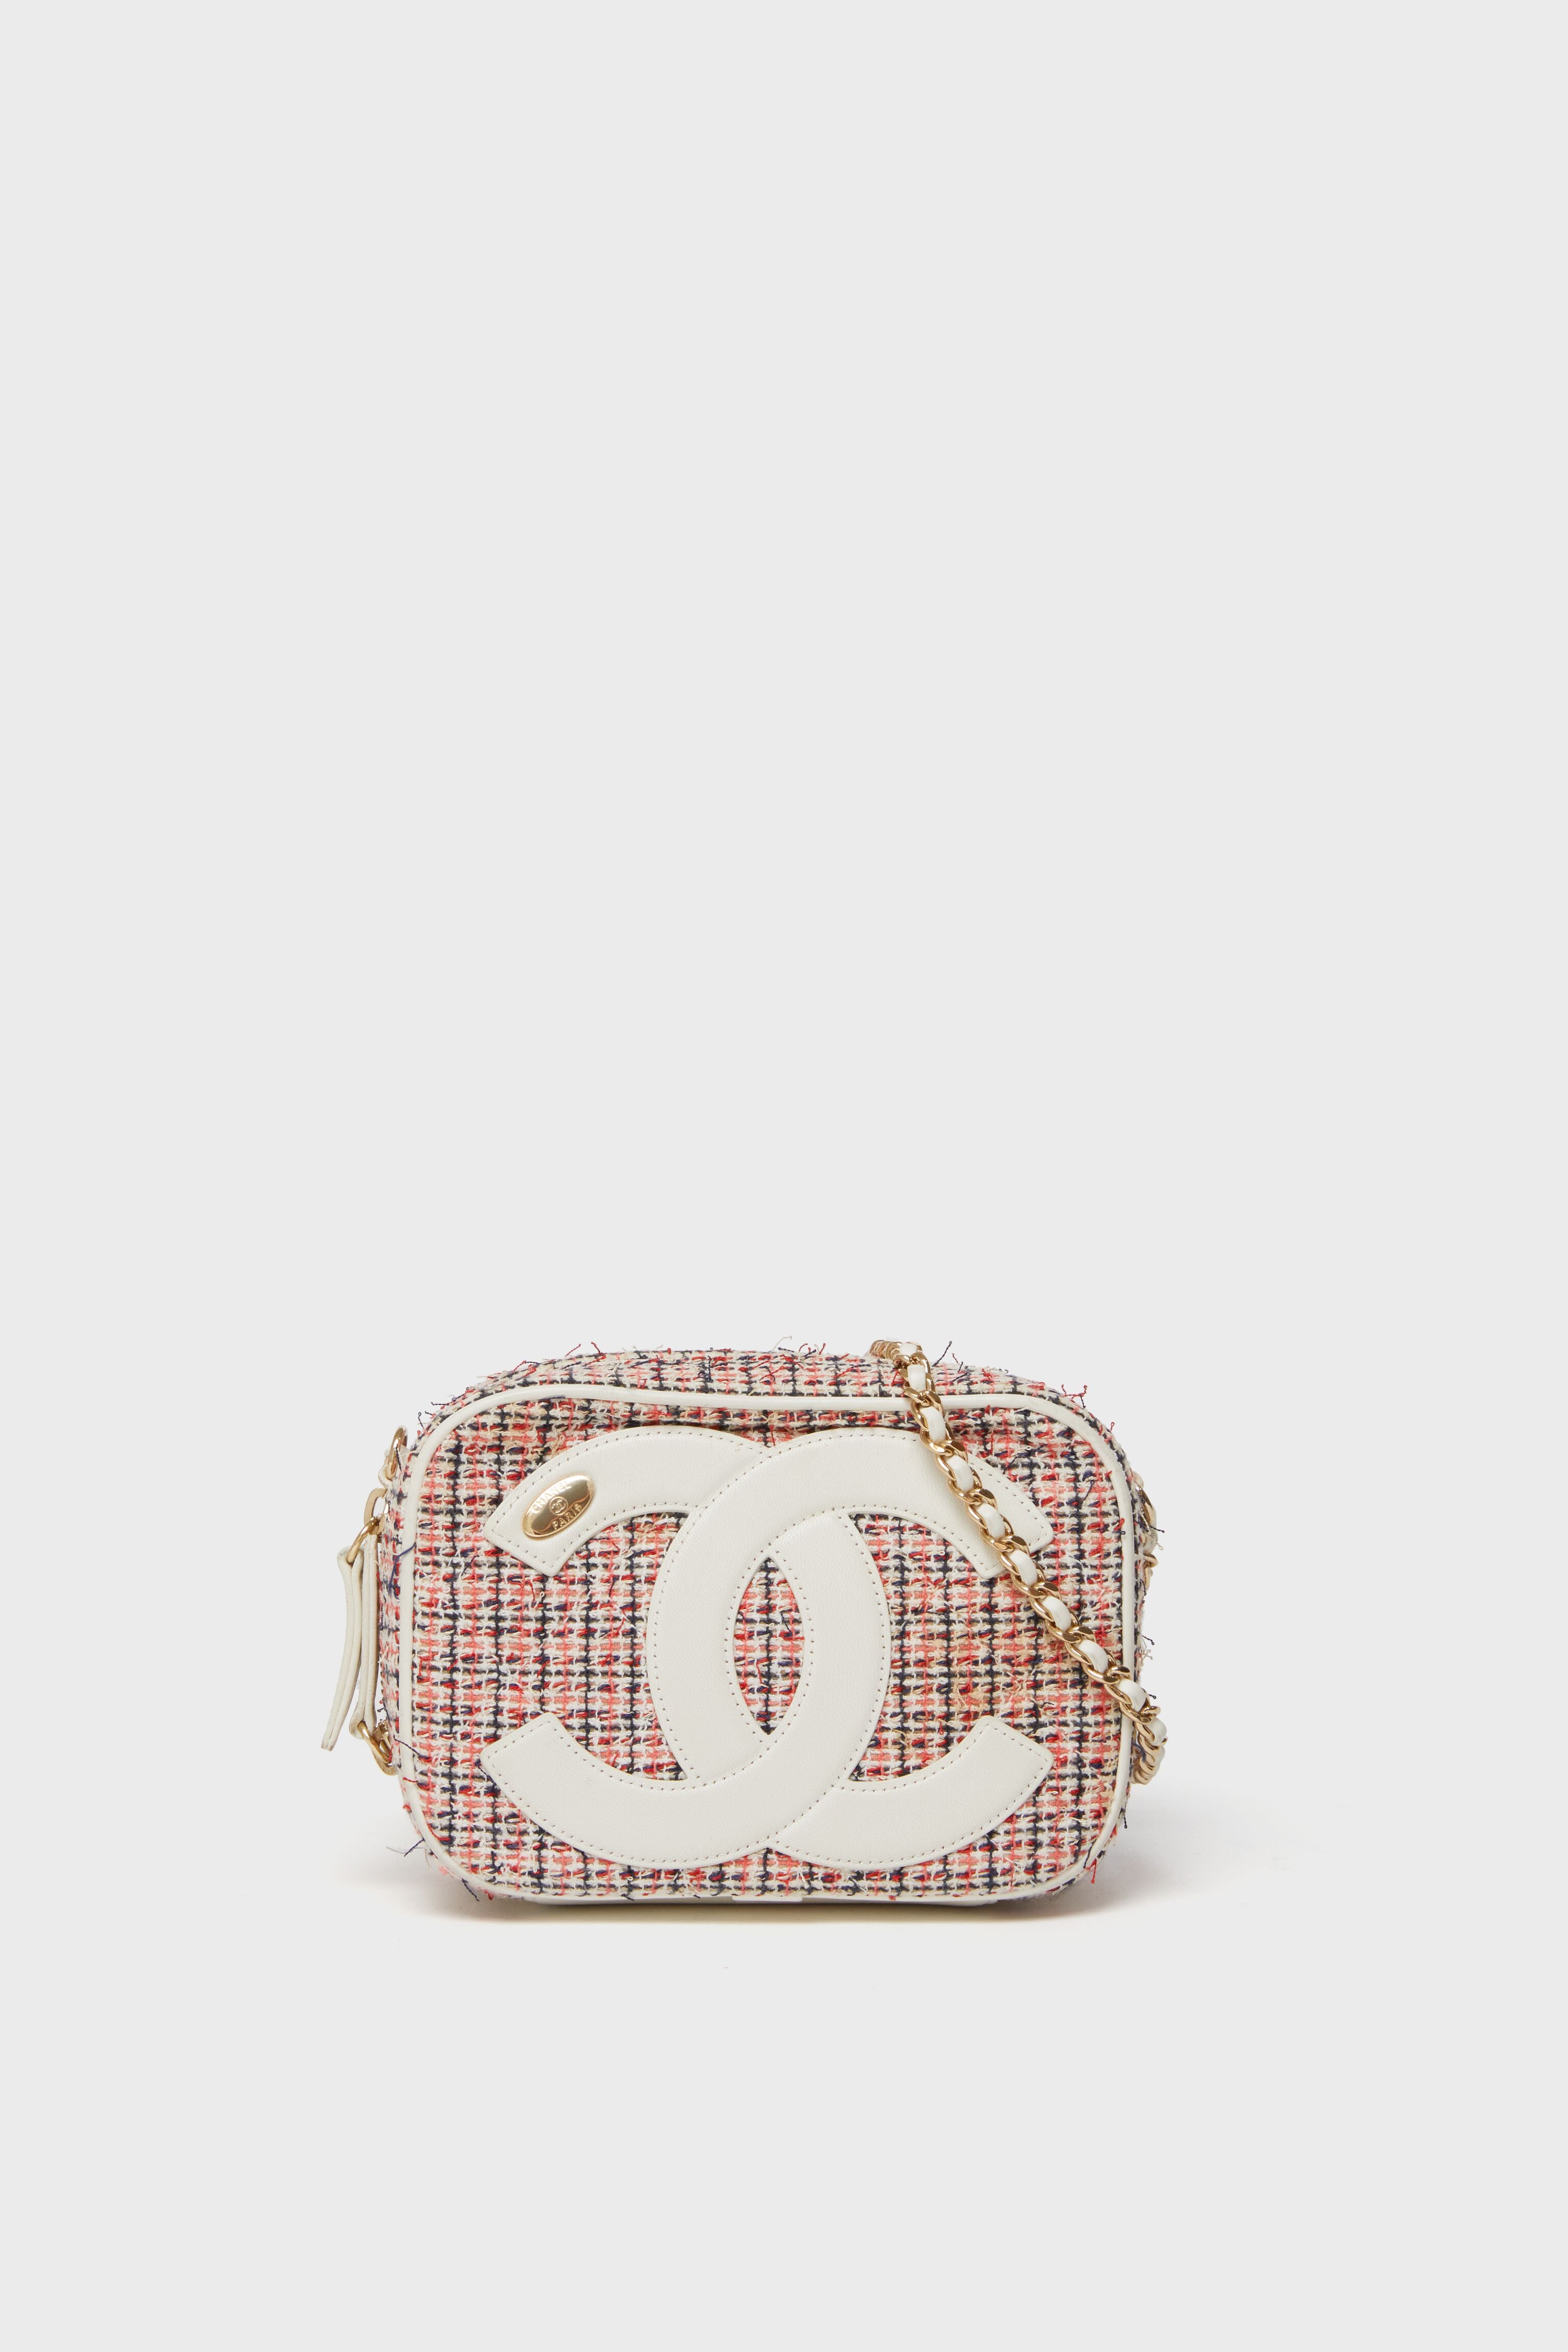 Chanel Yellow Multicolor Tweed Wallet on Chain | Tuckernuck Archive Collection